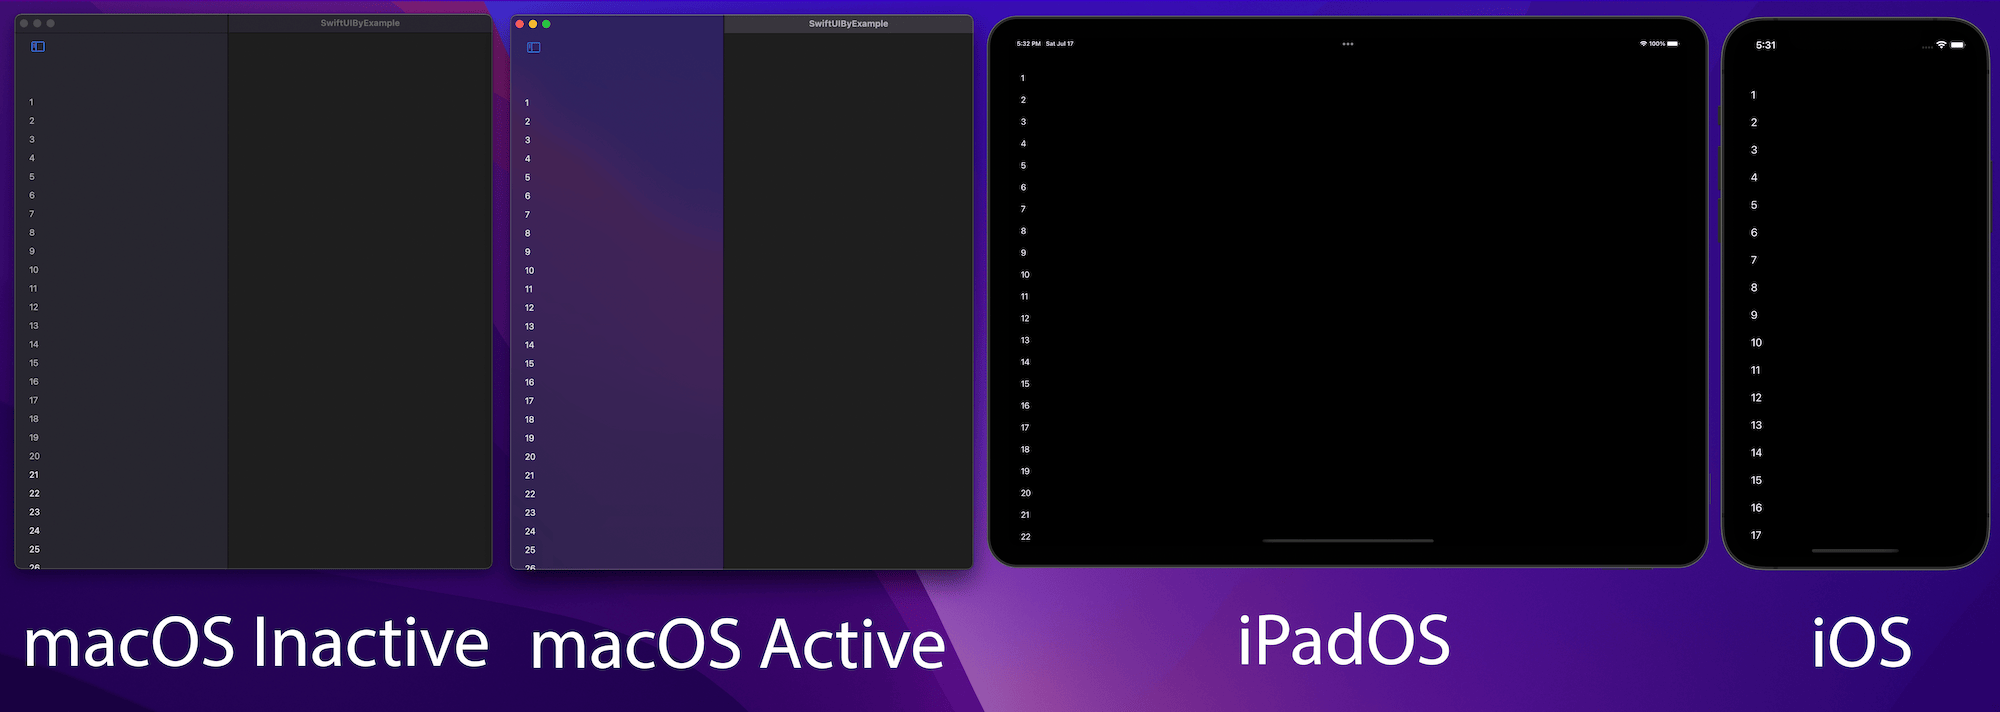 An inactive macOS window with an opaque sidebar, an active macOS window with a translucent sidebar, an iPad with a list, and an iPhone with a list. The iPad and iPhone lists have gray backgrounds and no list-item separators.